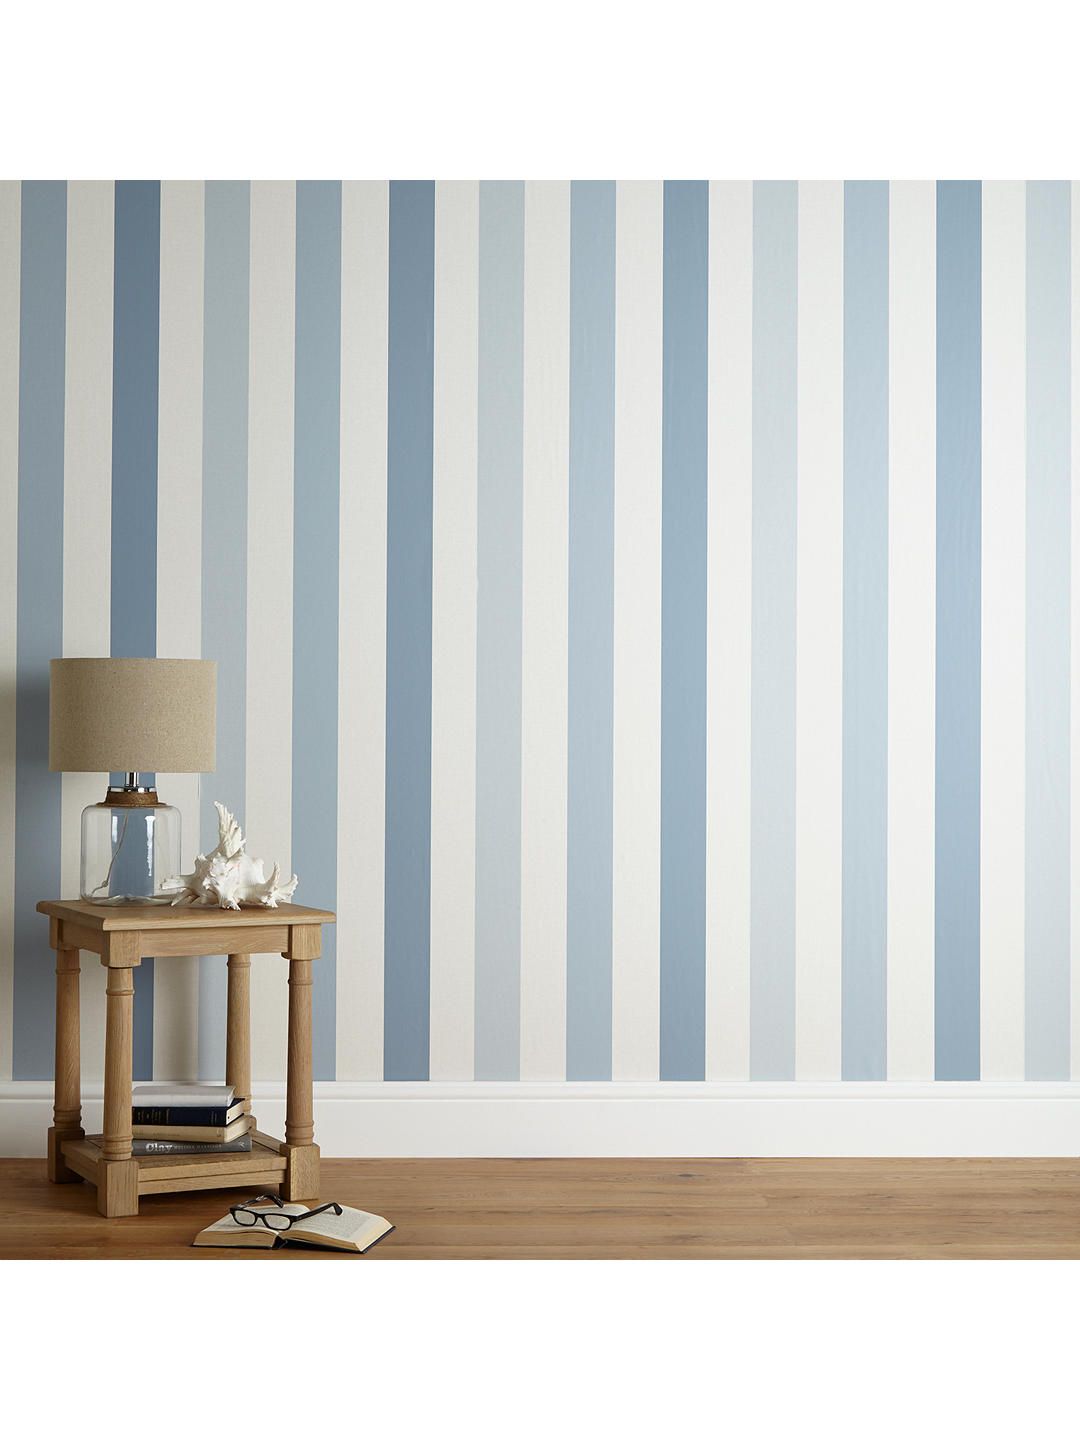 Buyjohn Lewis & Partners Padstow Stripe Wallpaper, - End Table , HD Wallpaper & Backgrounds